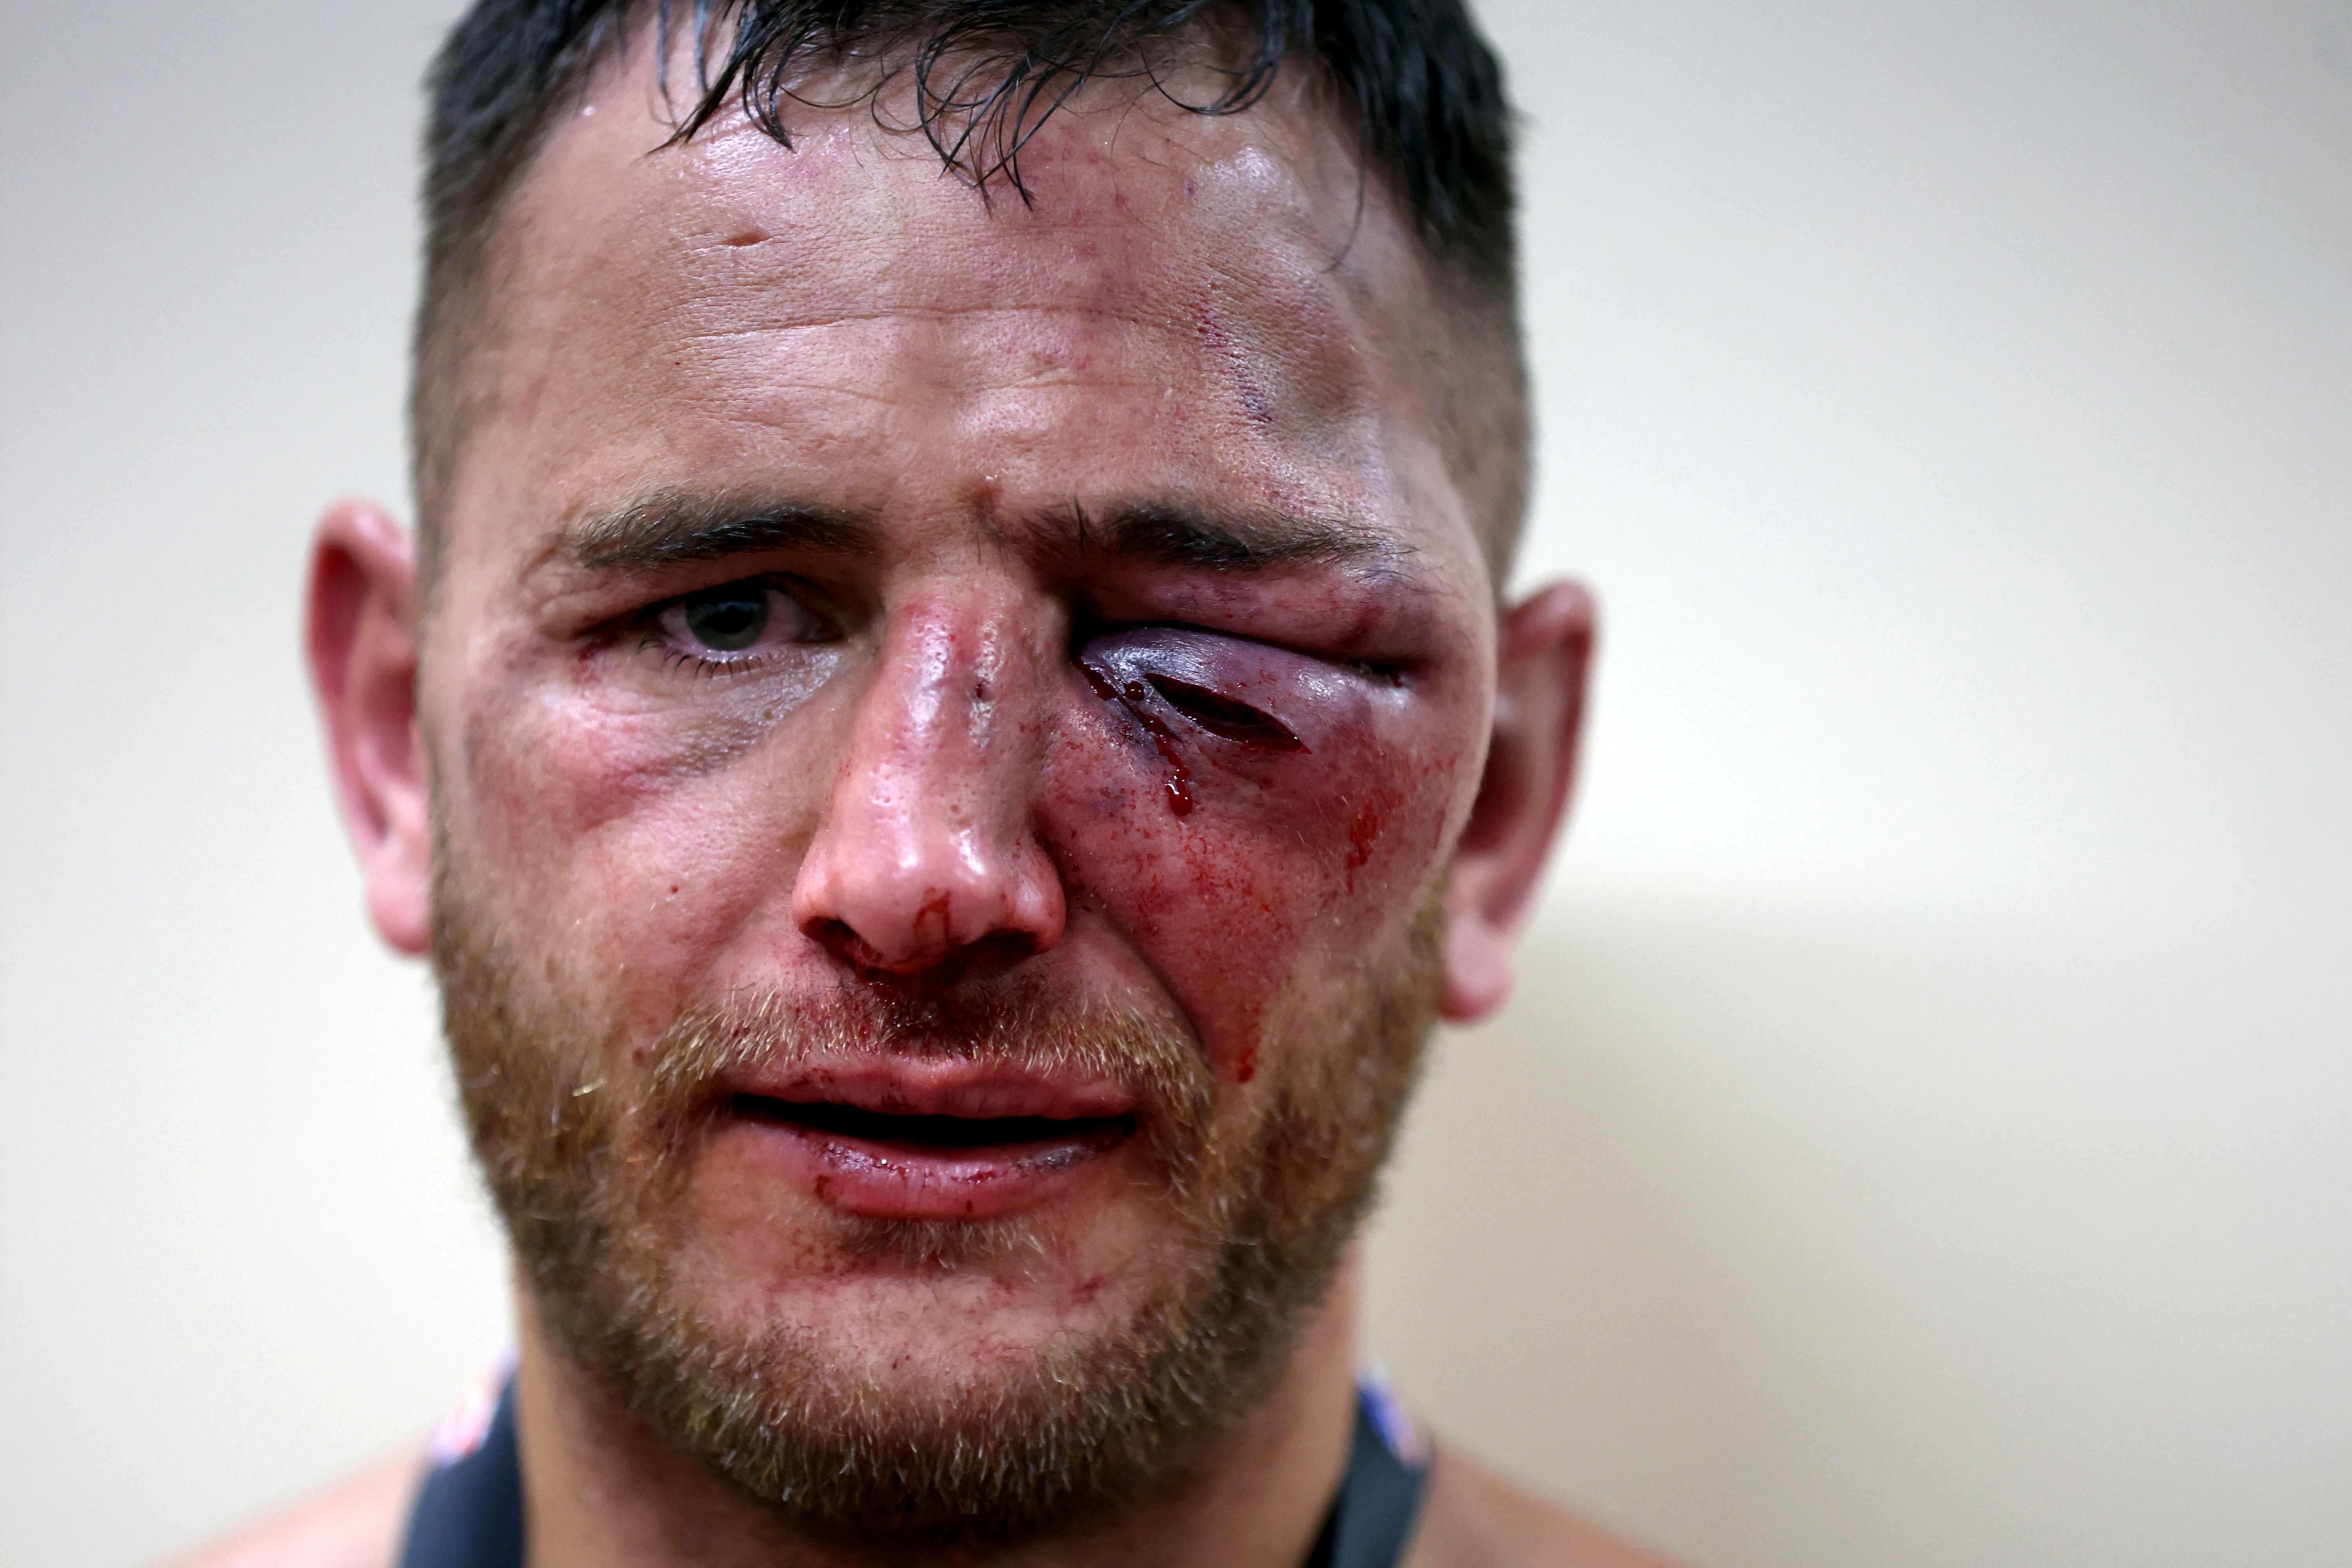 , Bare-knuckle boxers show off horror injuries including gruesome swollen eyes after brutal bloodbath fights